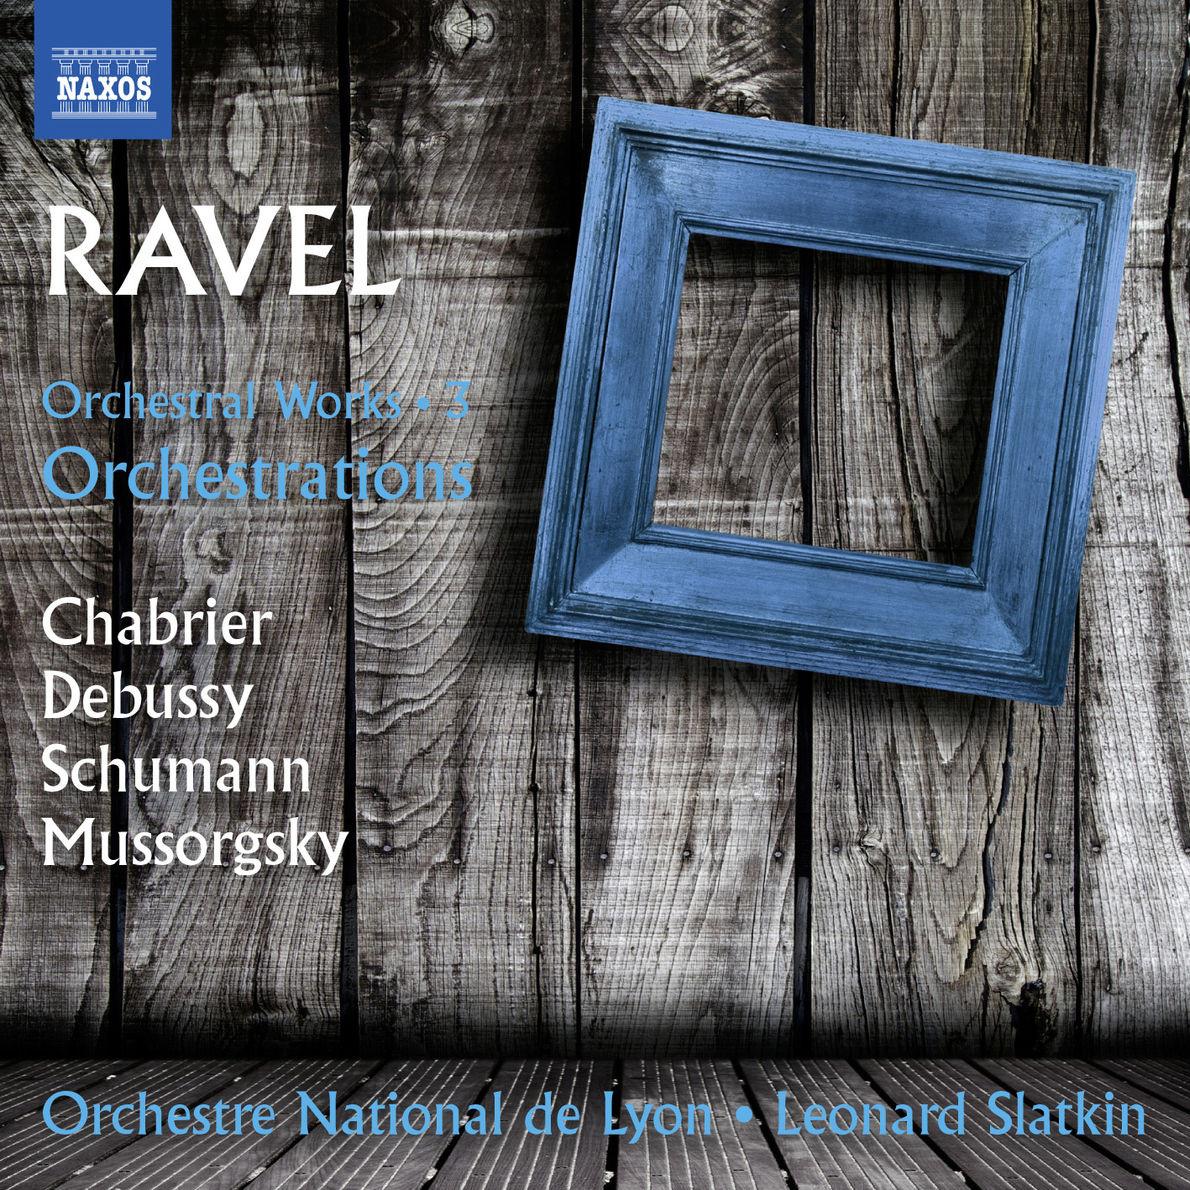 Ravel: Orchestral Works, Vol. 3  Orchestrations